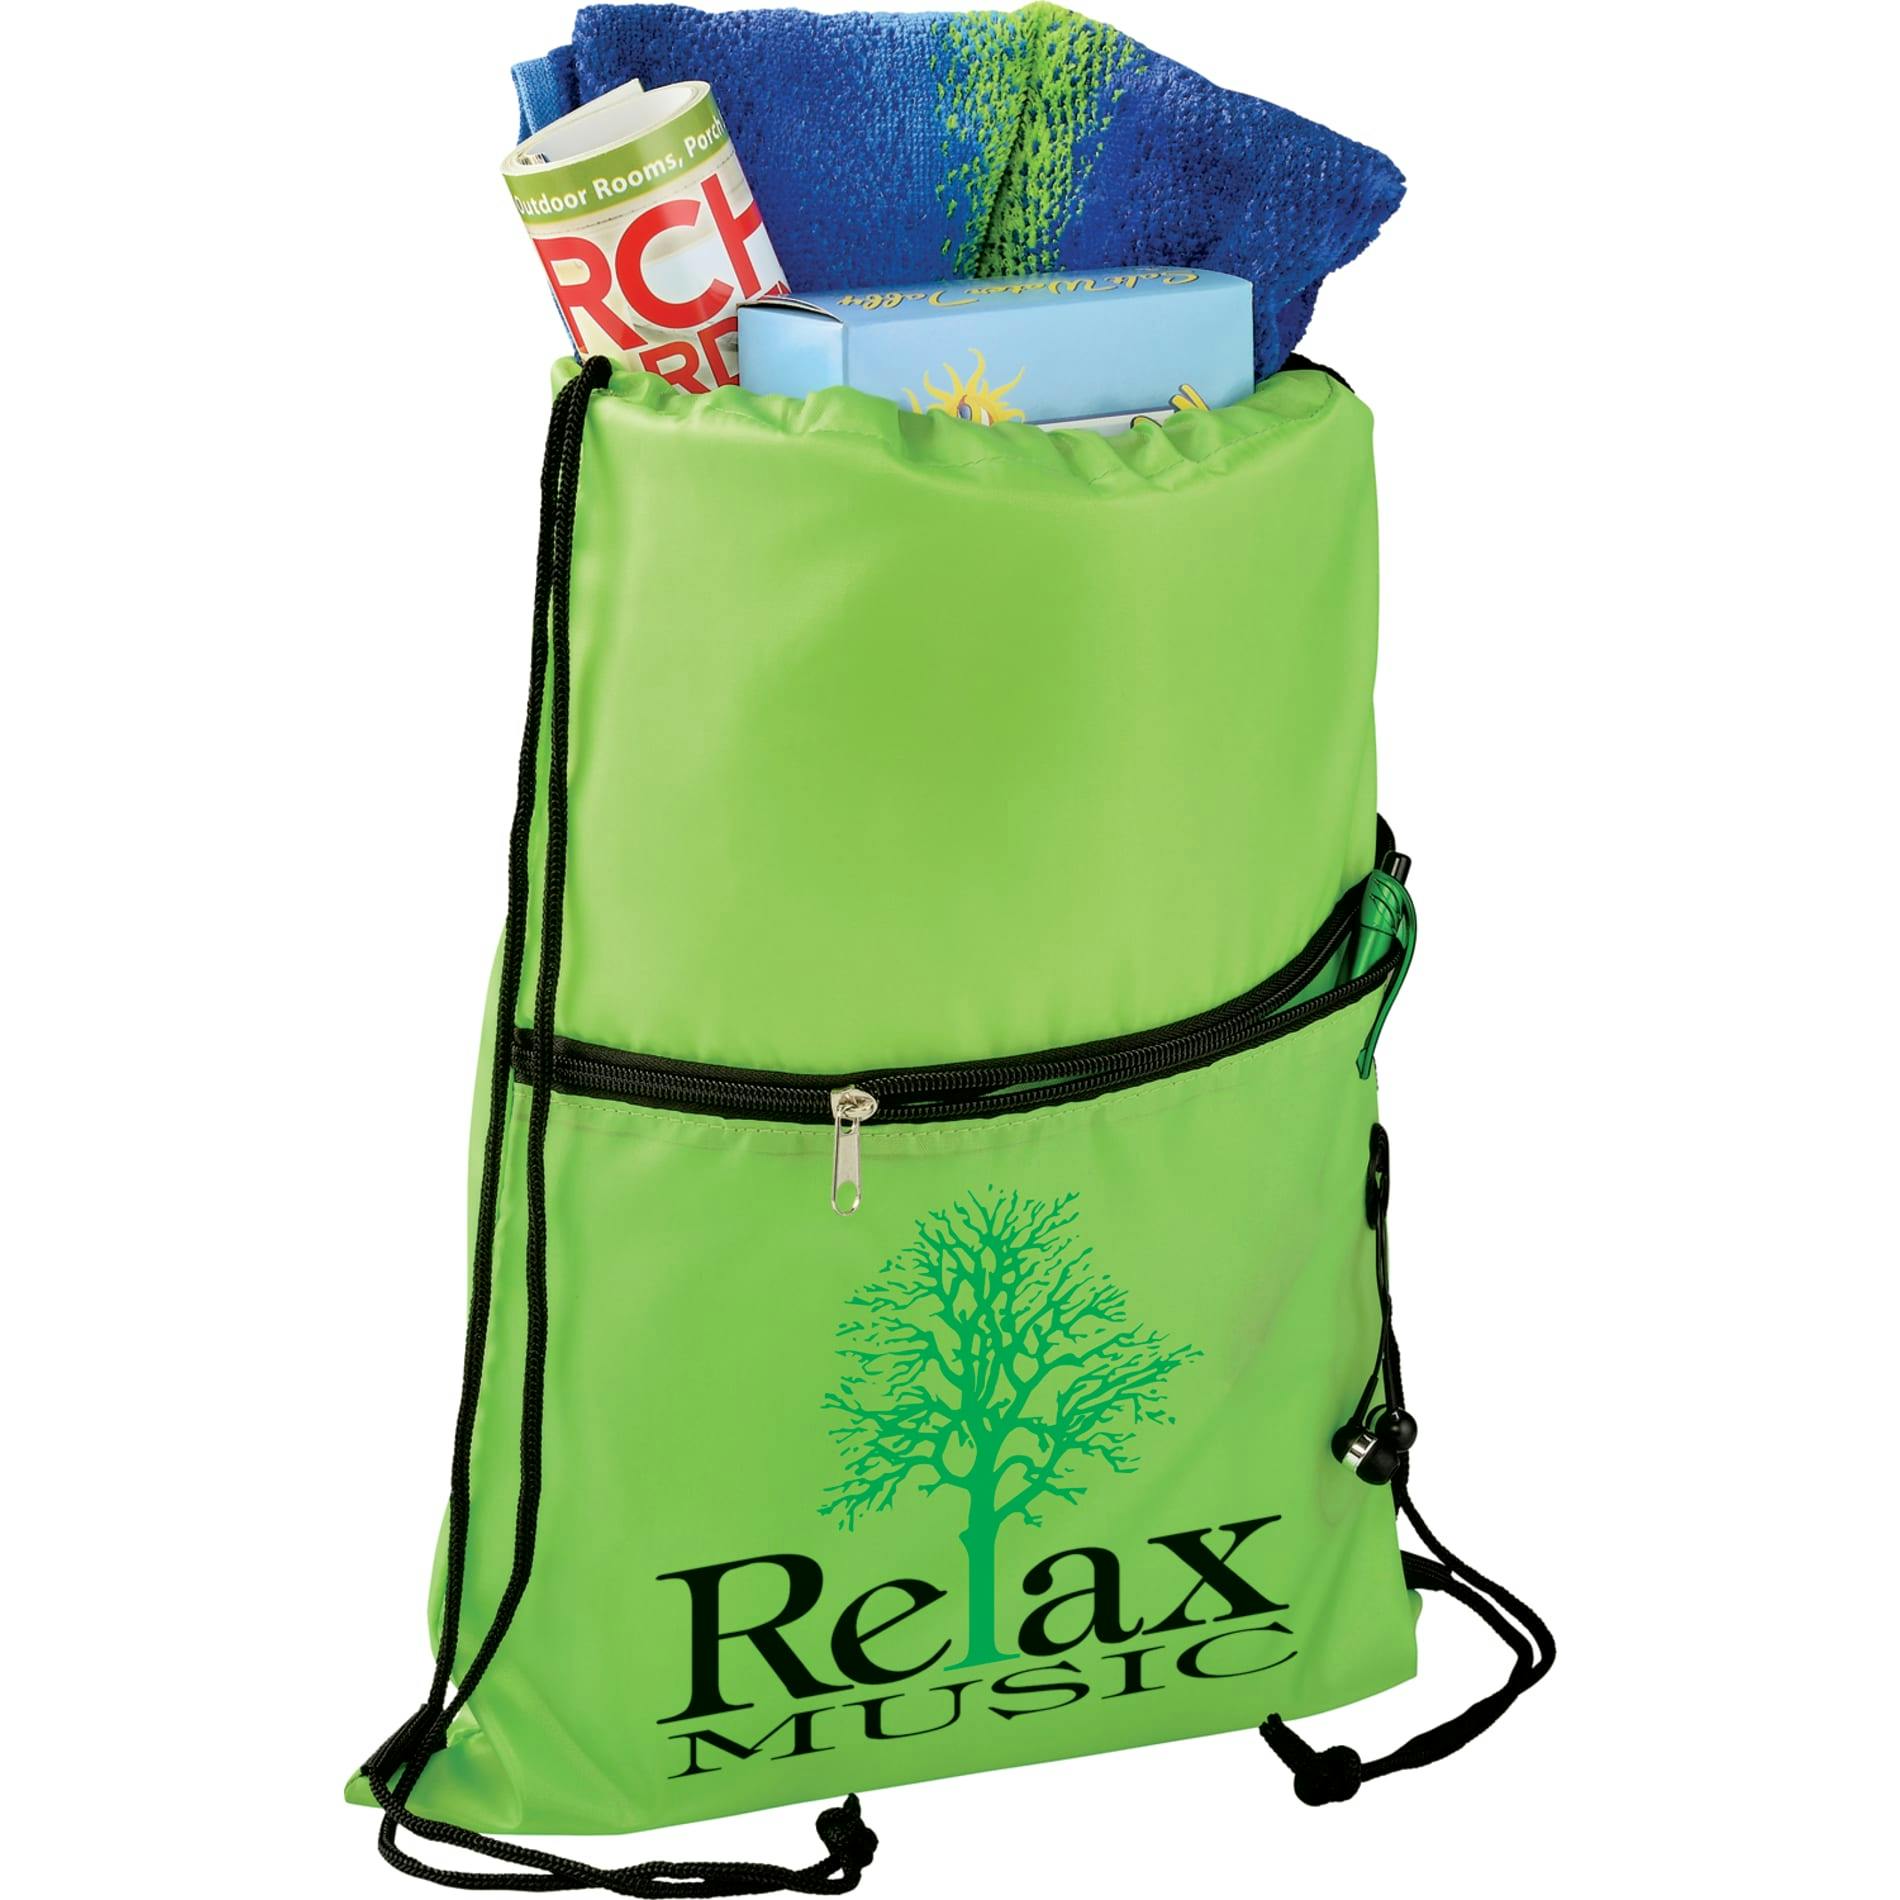 Insulated Zippered Drawstring Bag - additional Image 3